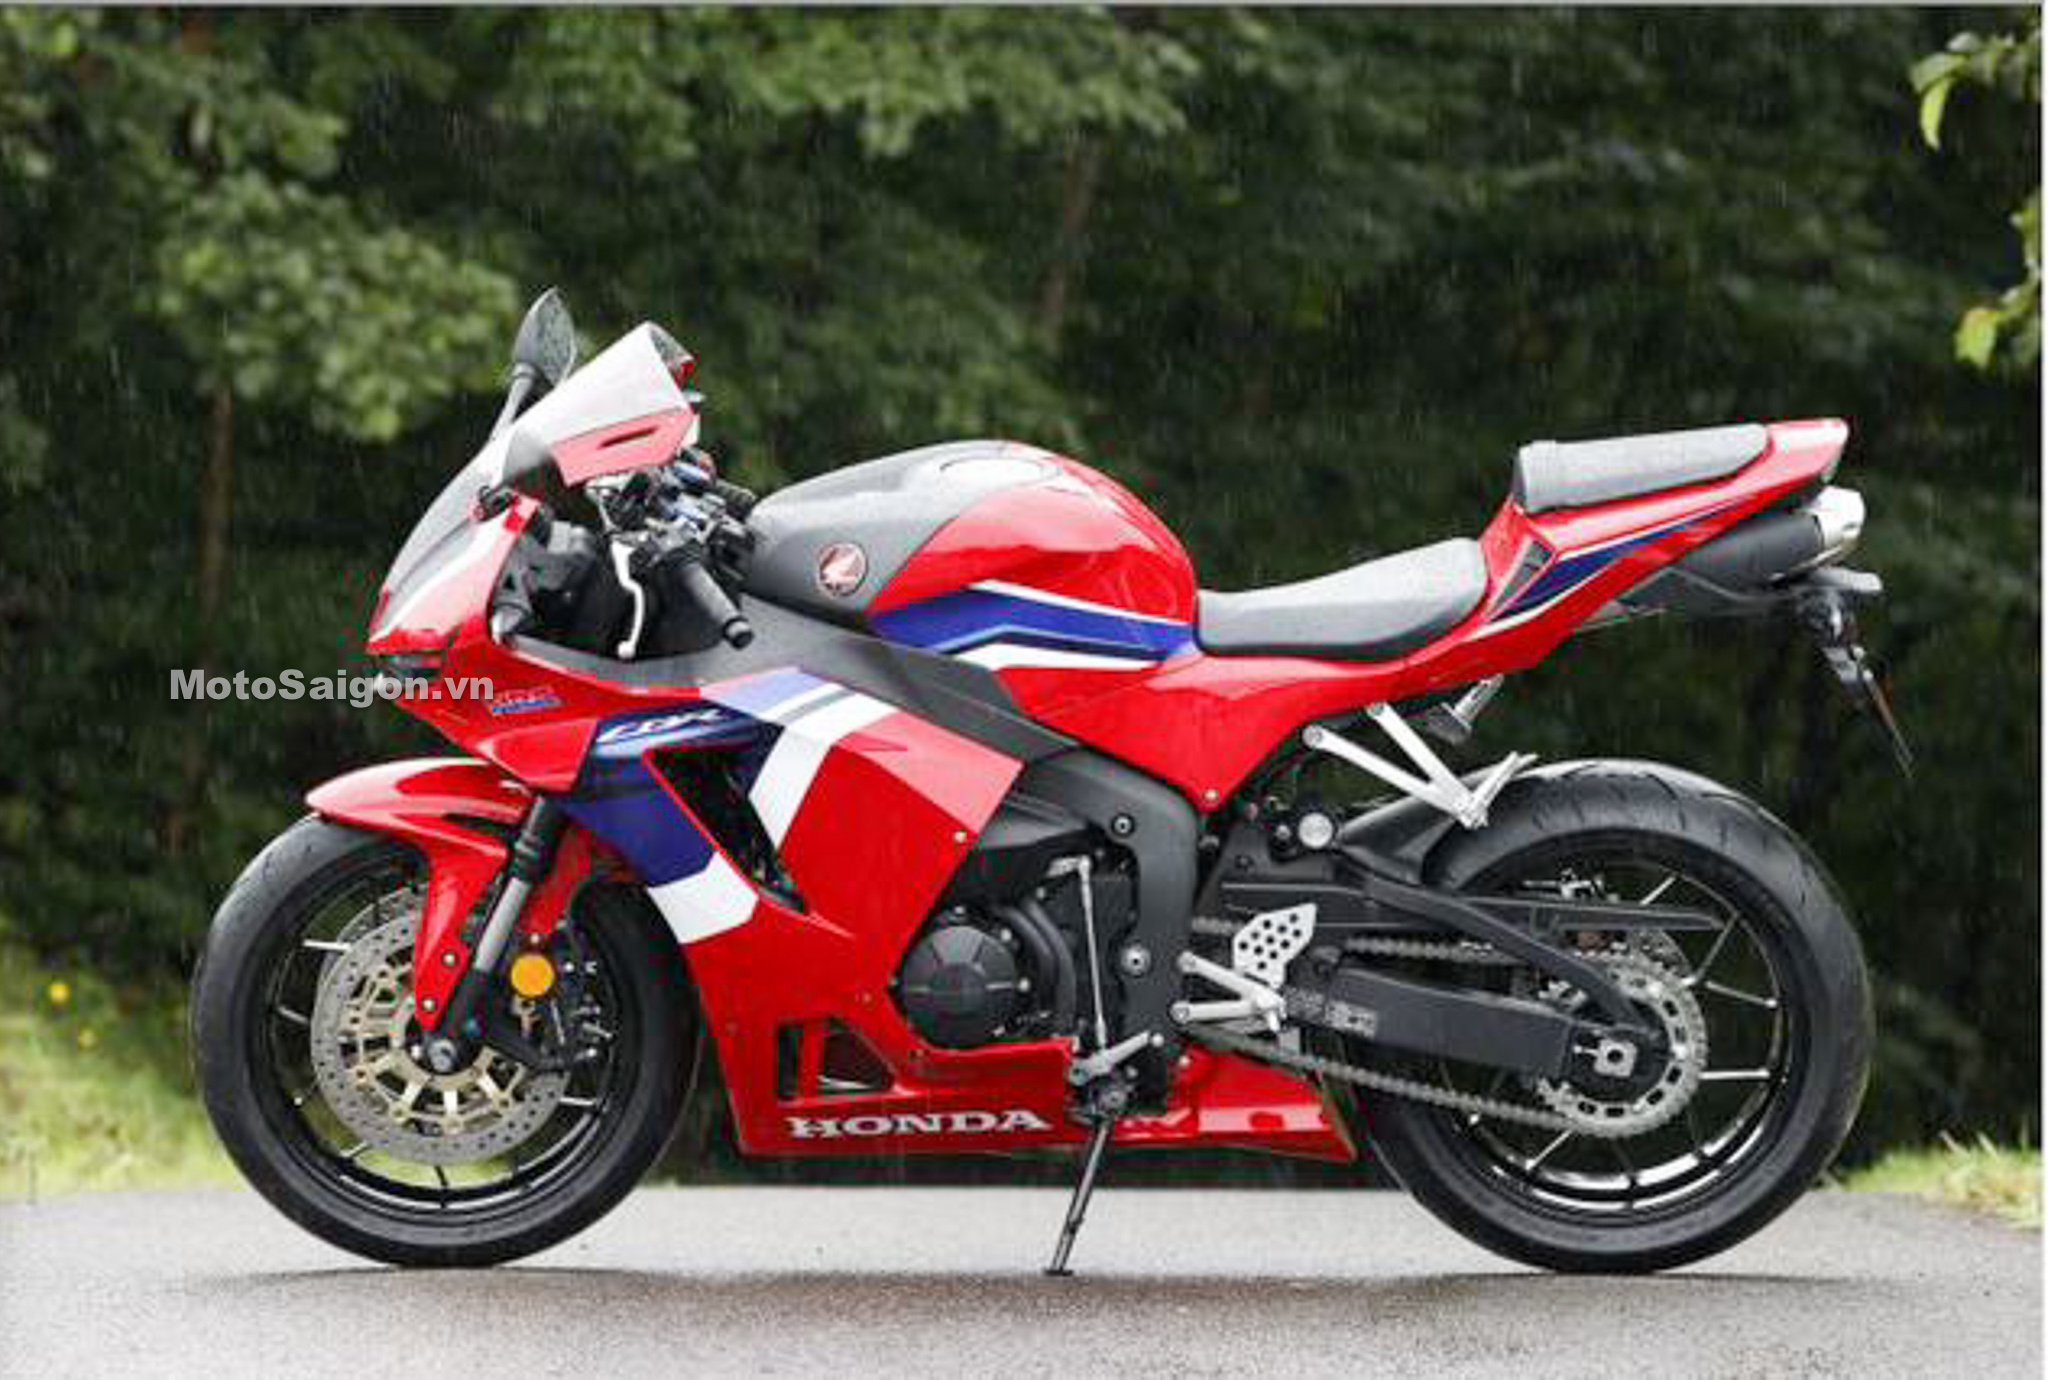 Image of Honda CBR600RR 2021 before announcement of selling price ...